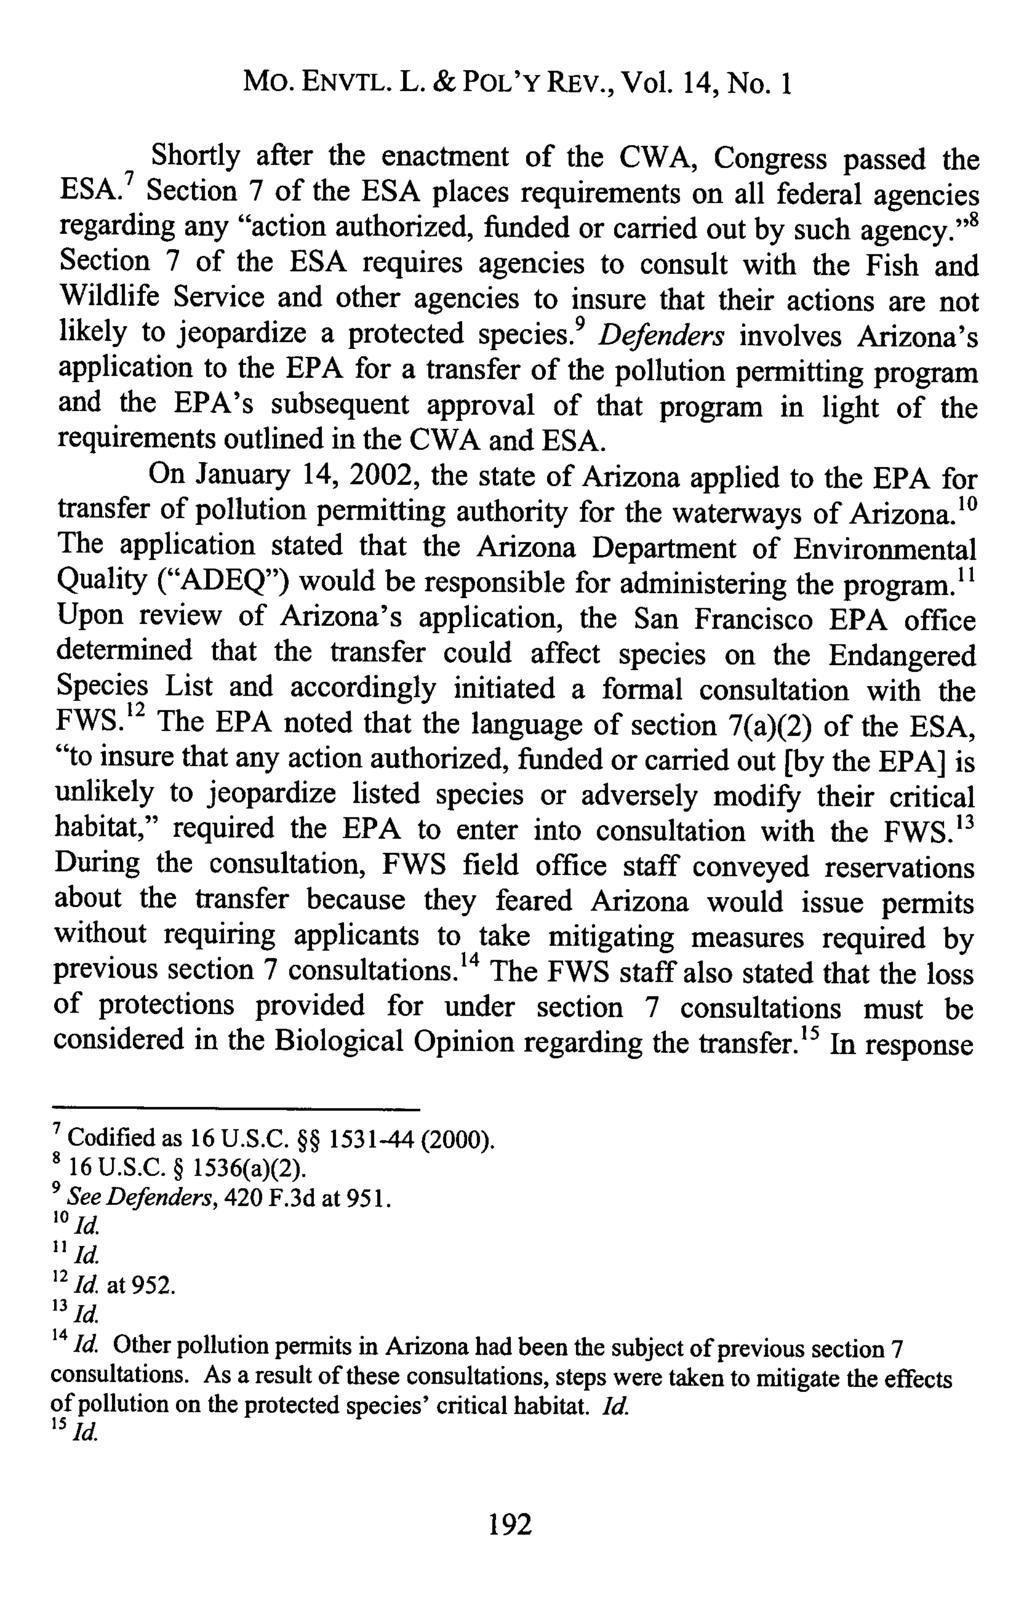 Mo. ENVTL. L. & POL'Y REv., Vol. 14, No. 1 Shortly after the enactment of the CWA, Congress passed the ESA.